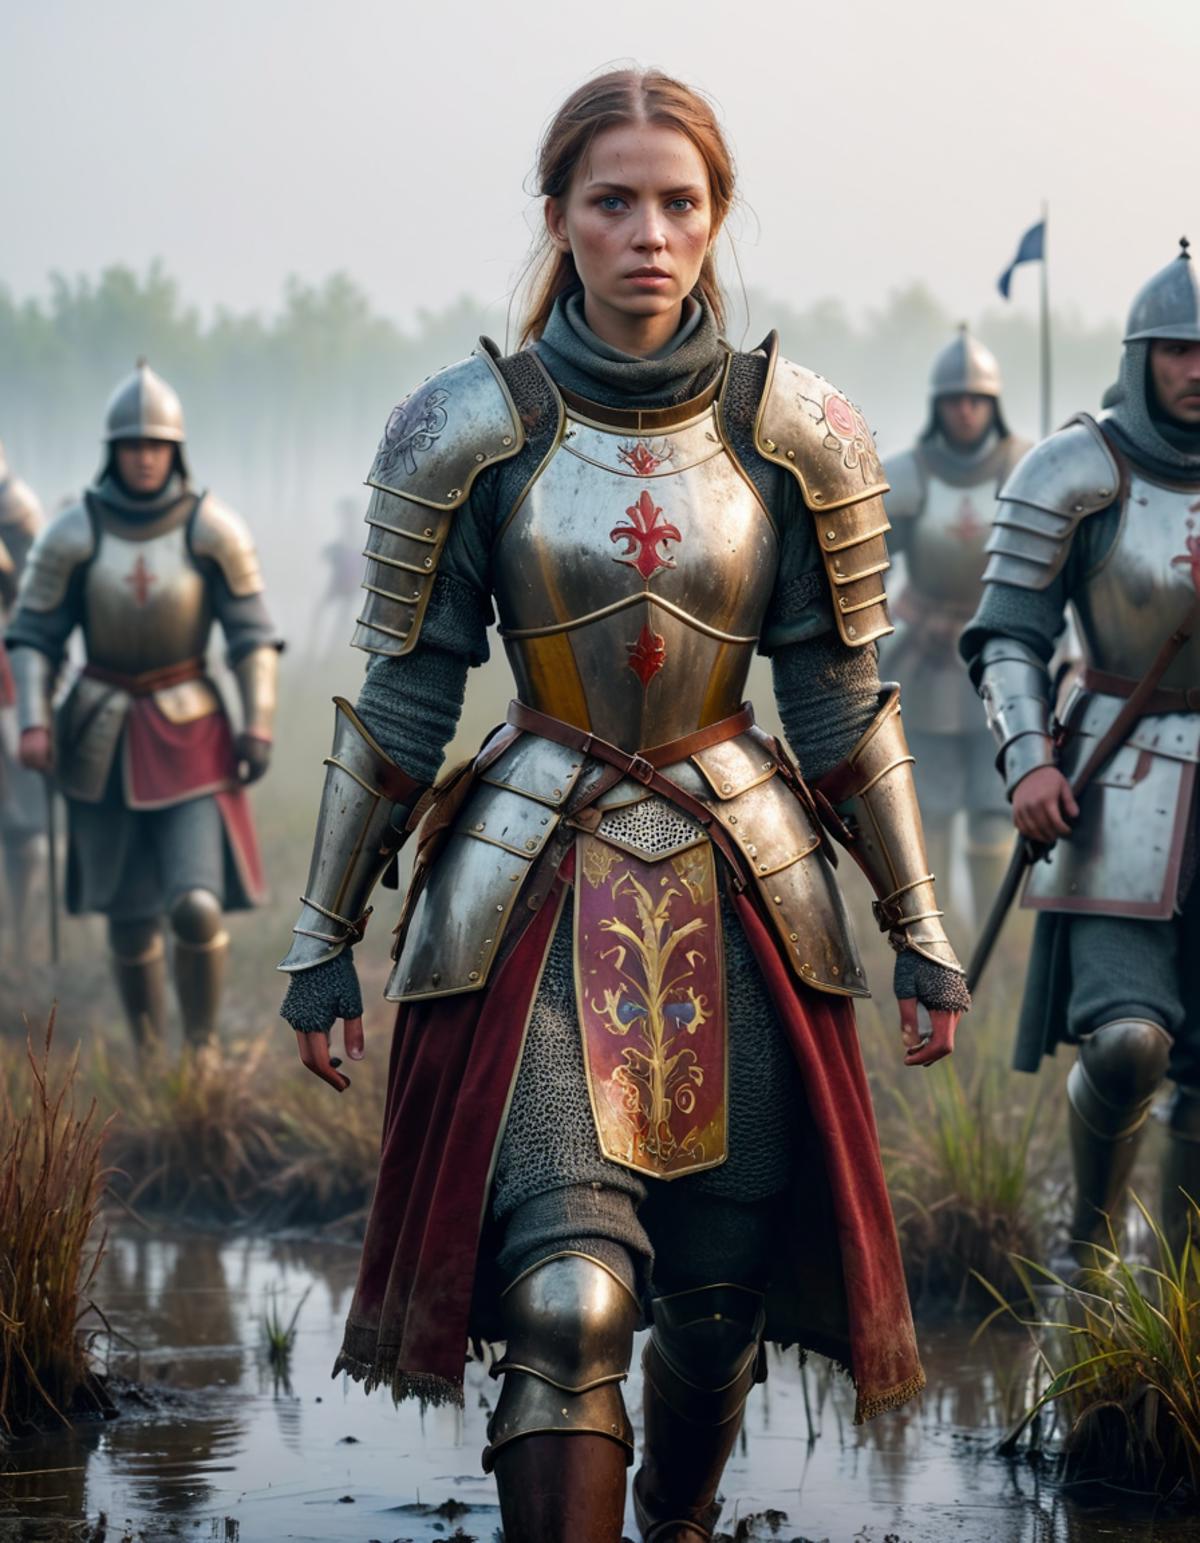 A woman in medieval armor walks with knights in a field.